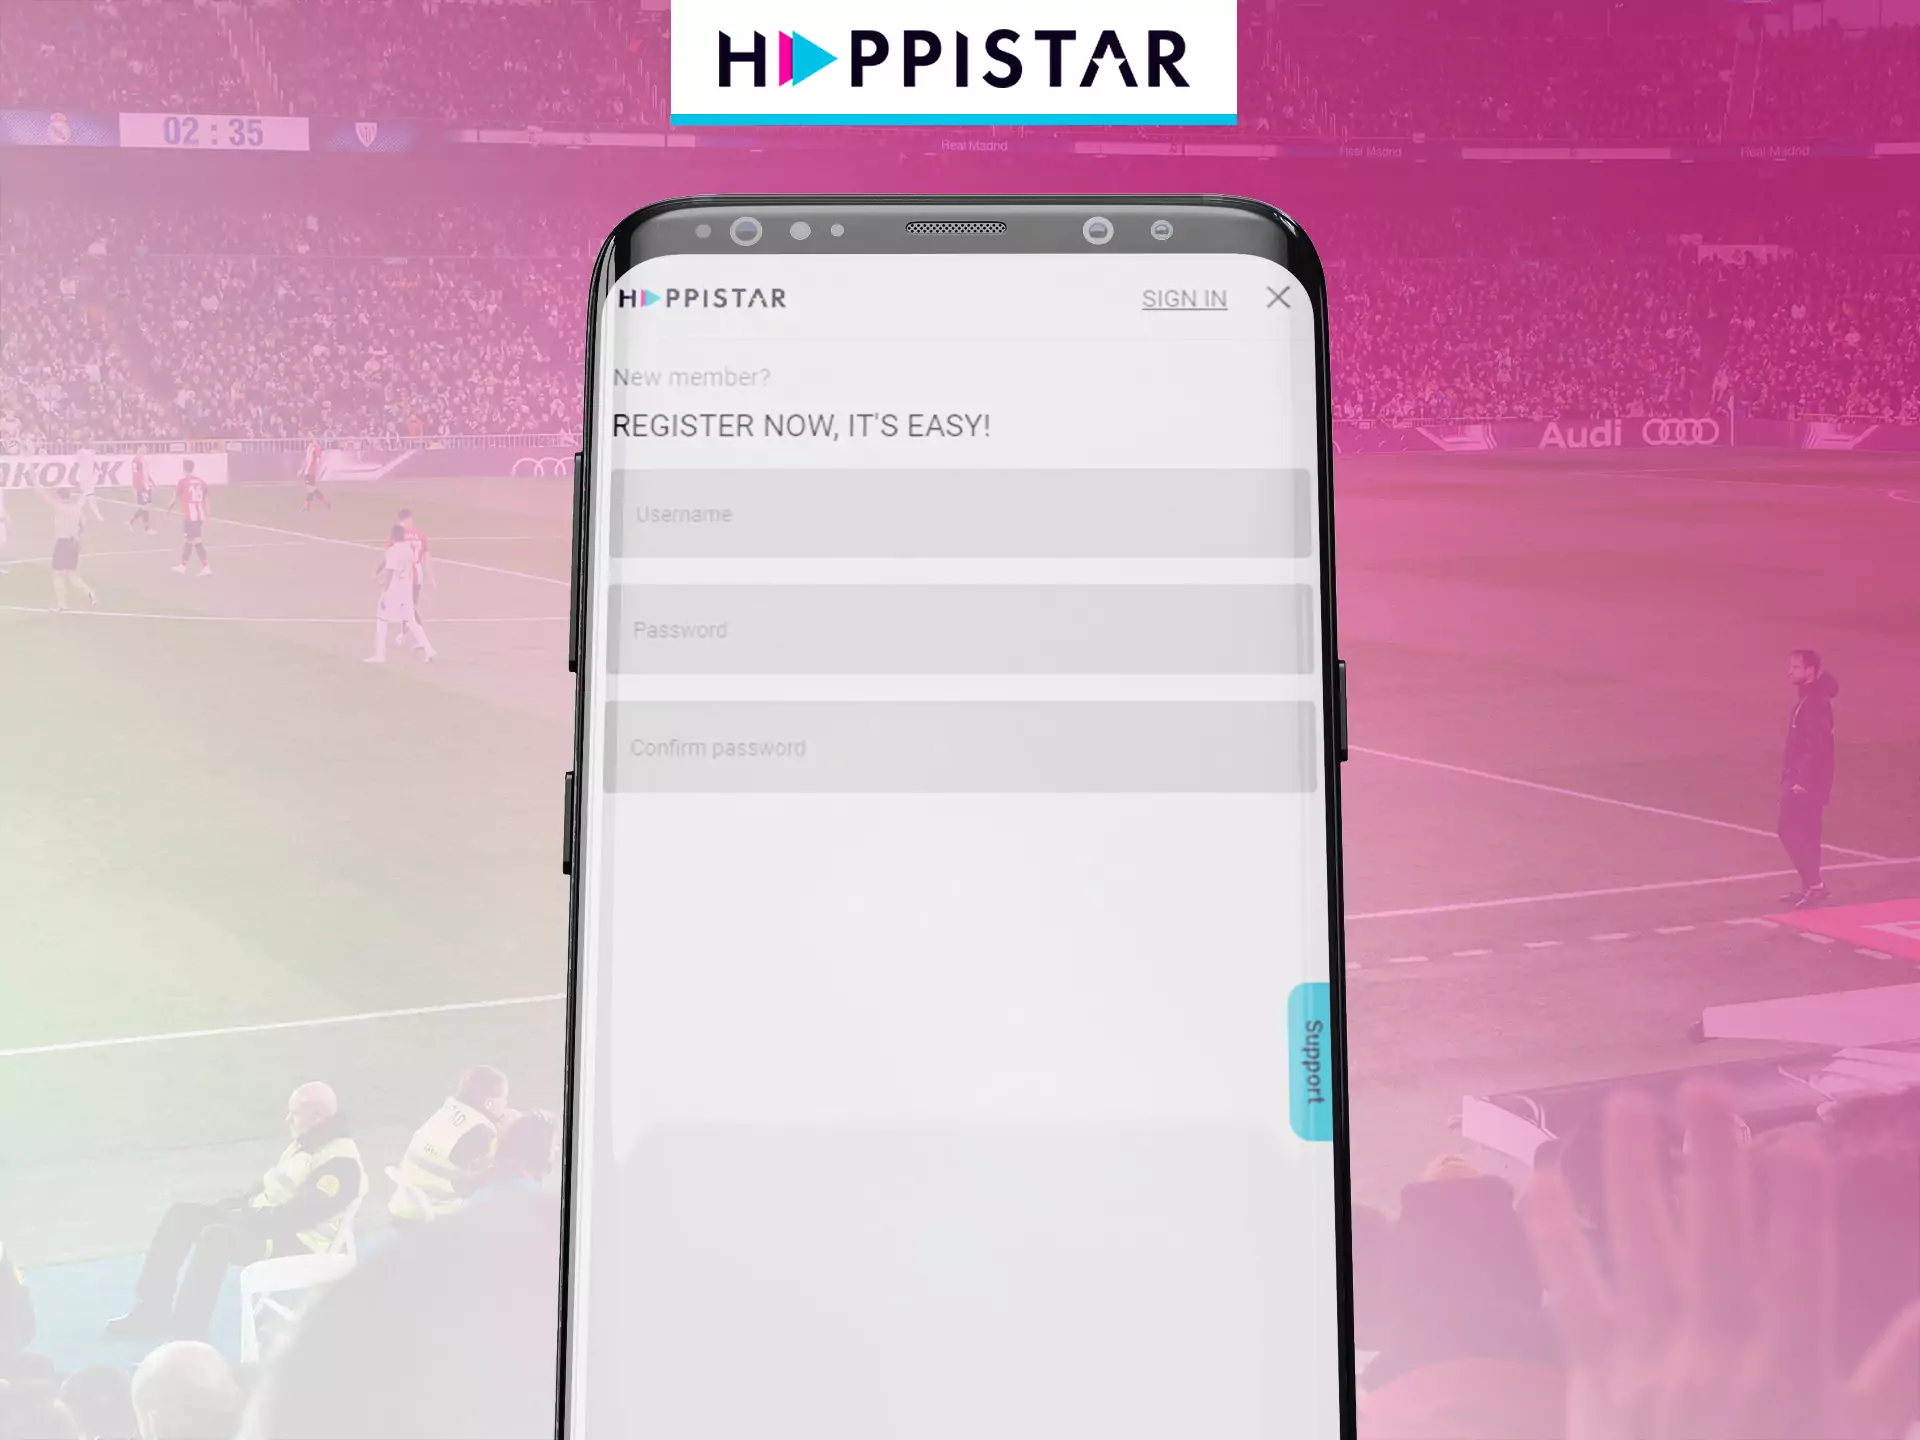 Create an account on Happistar to be able to place bets.